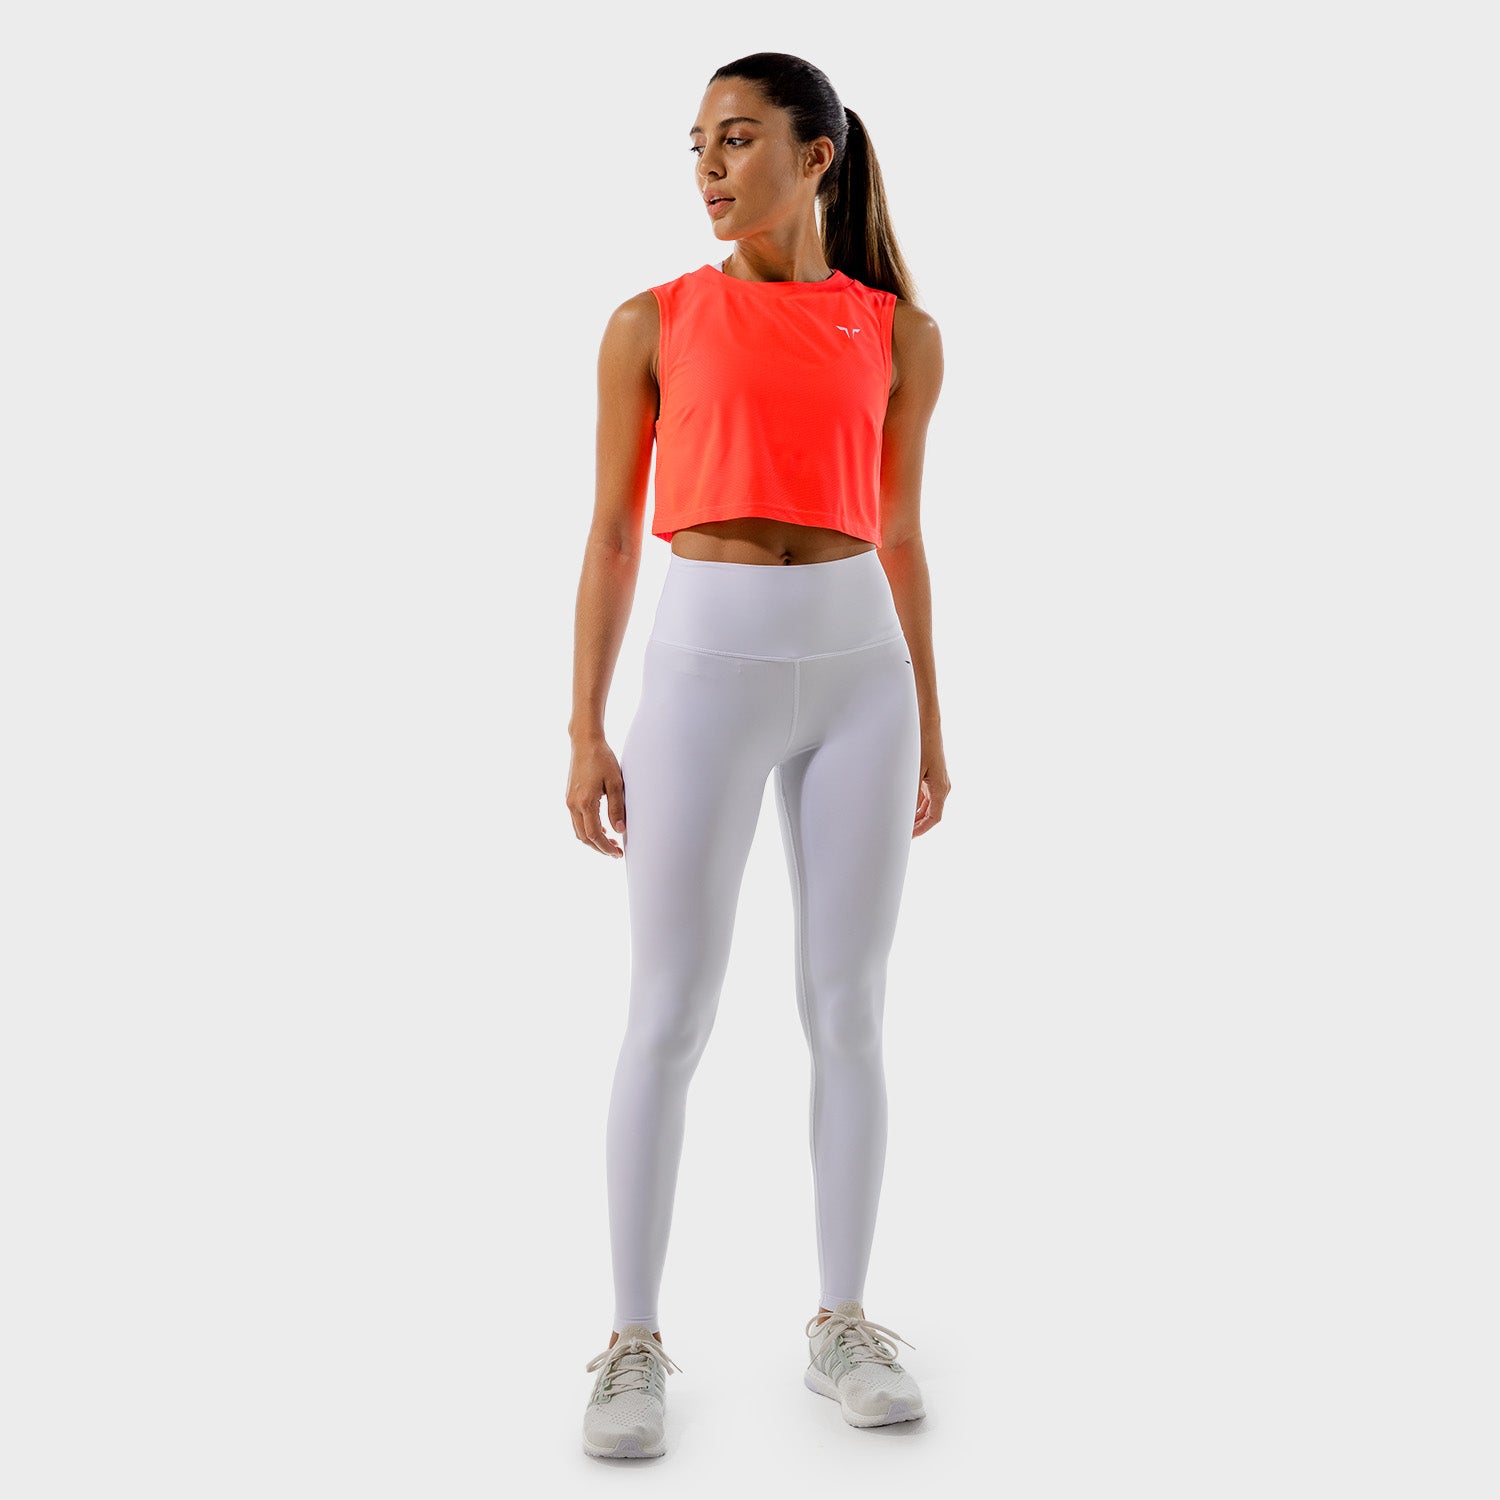 squatwolf-gym-t-shirts-for-women-limitless-crop-top-coral-workout-clothes